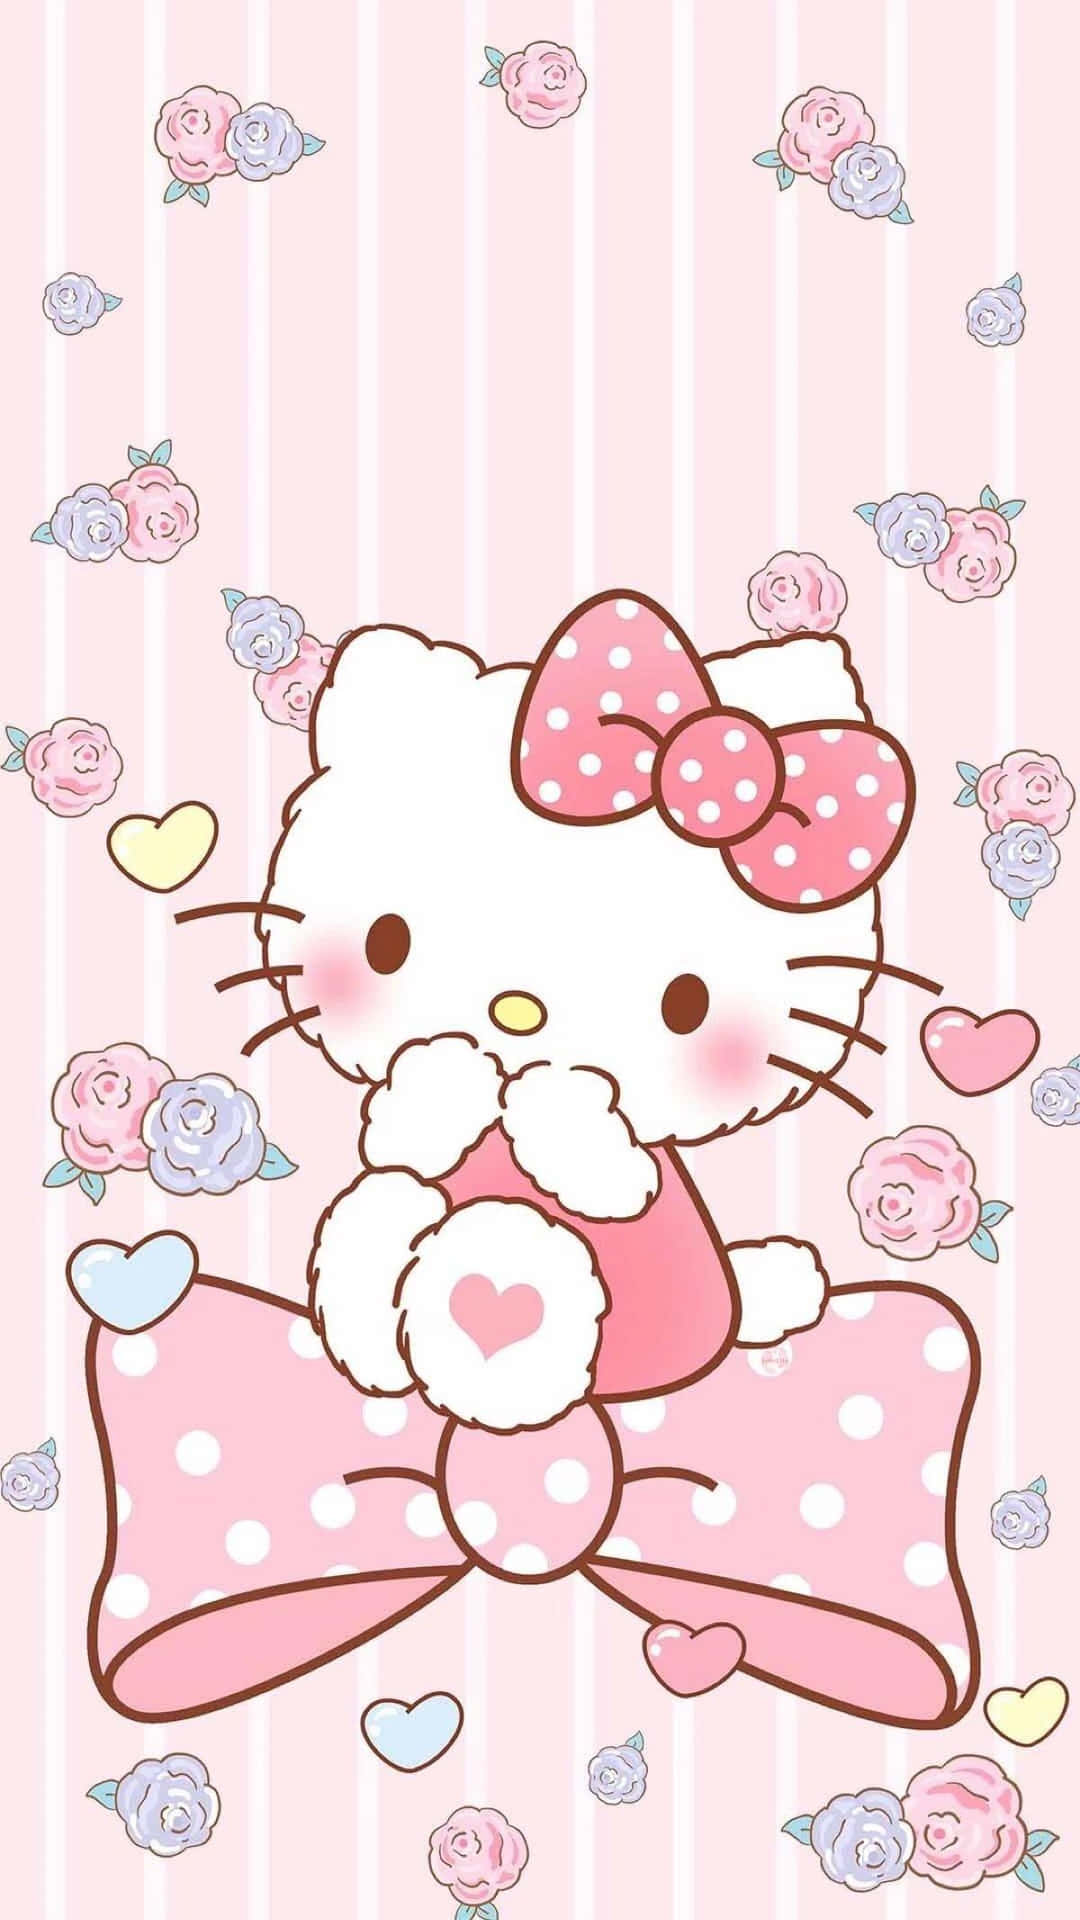 Kitty White Smiling and Waving on a Pastel Pink Background Wallpaper